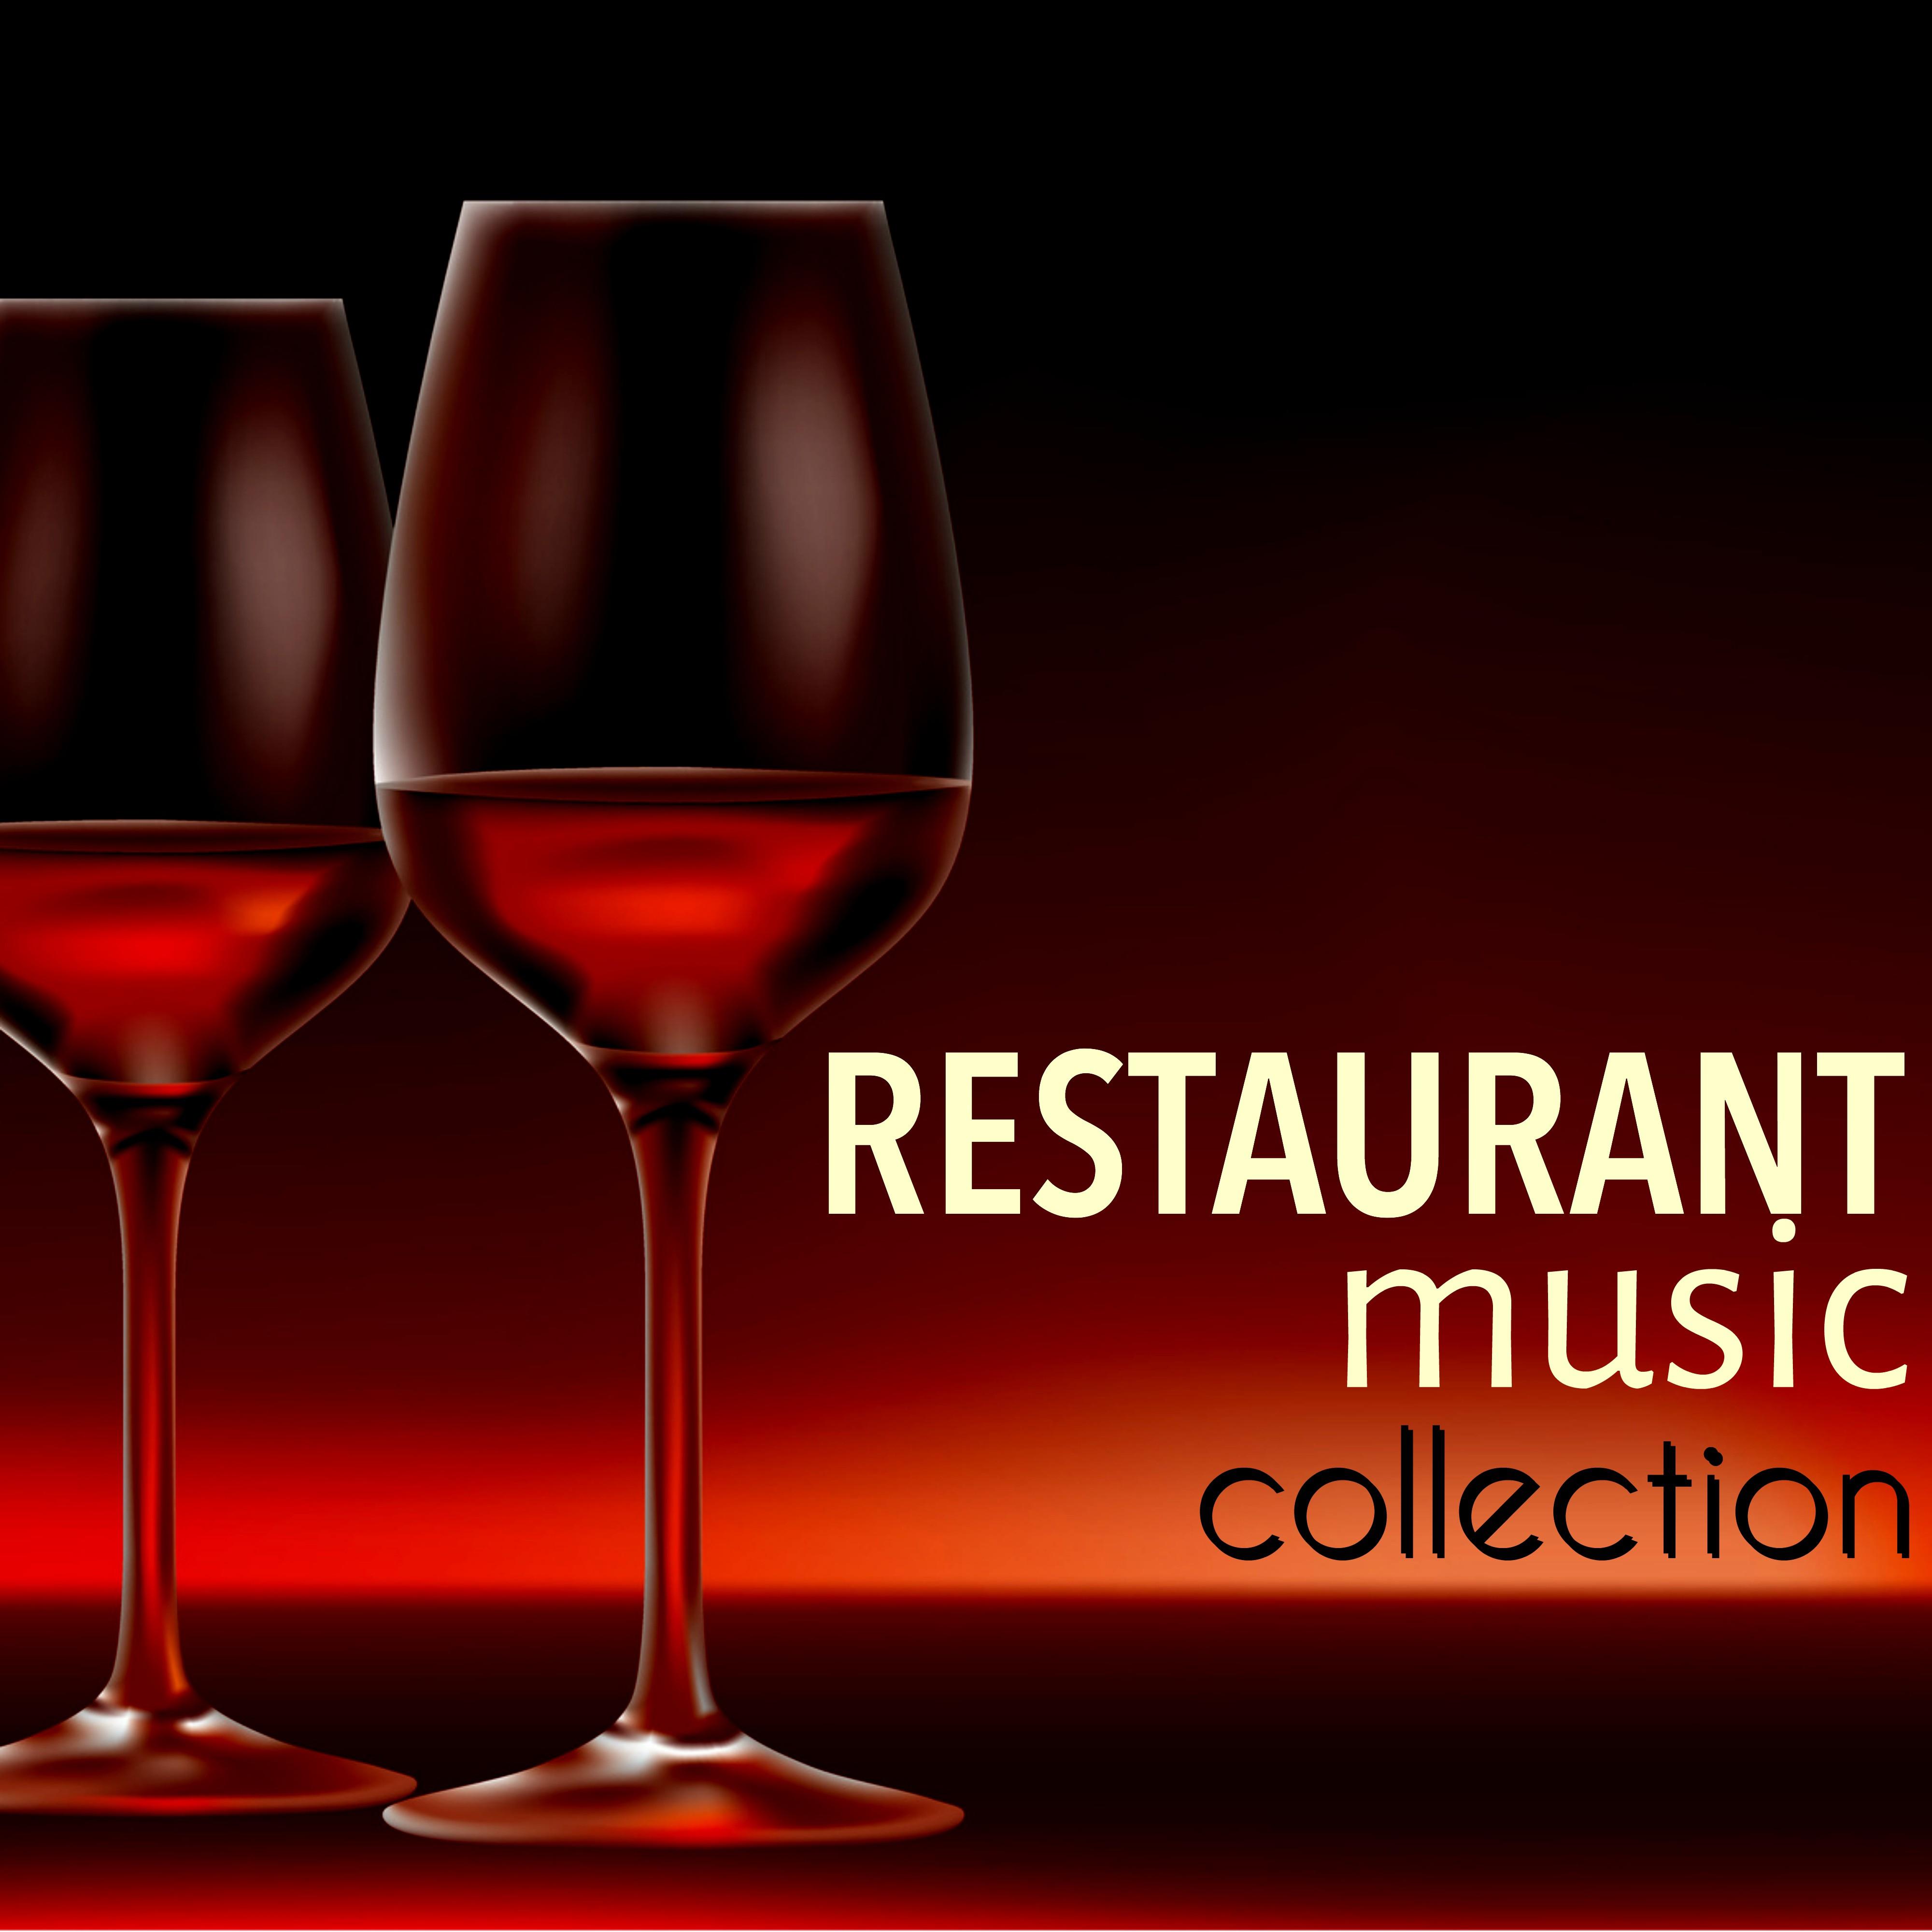 Restaurant Music Collection – Big Band Jazz Background and Blues, Relaxing Piano Dinner Music, Sax and Piano Songs